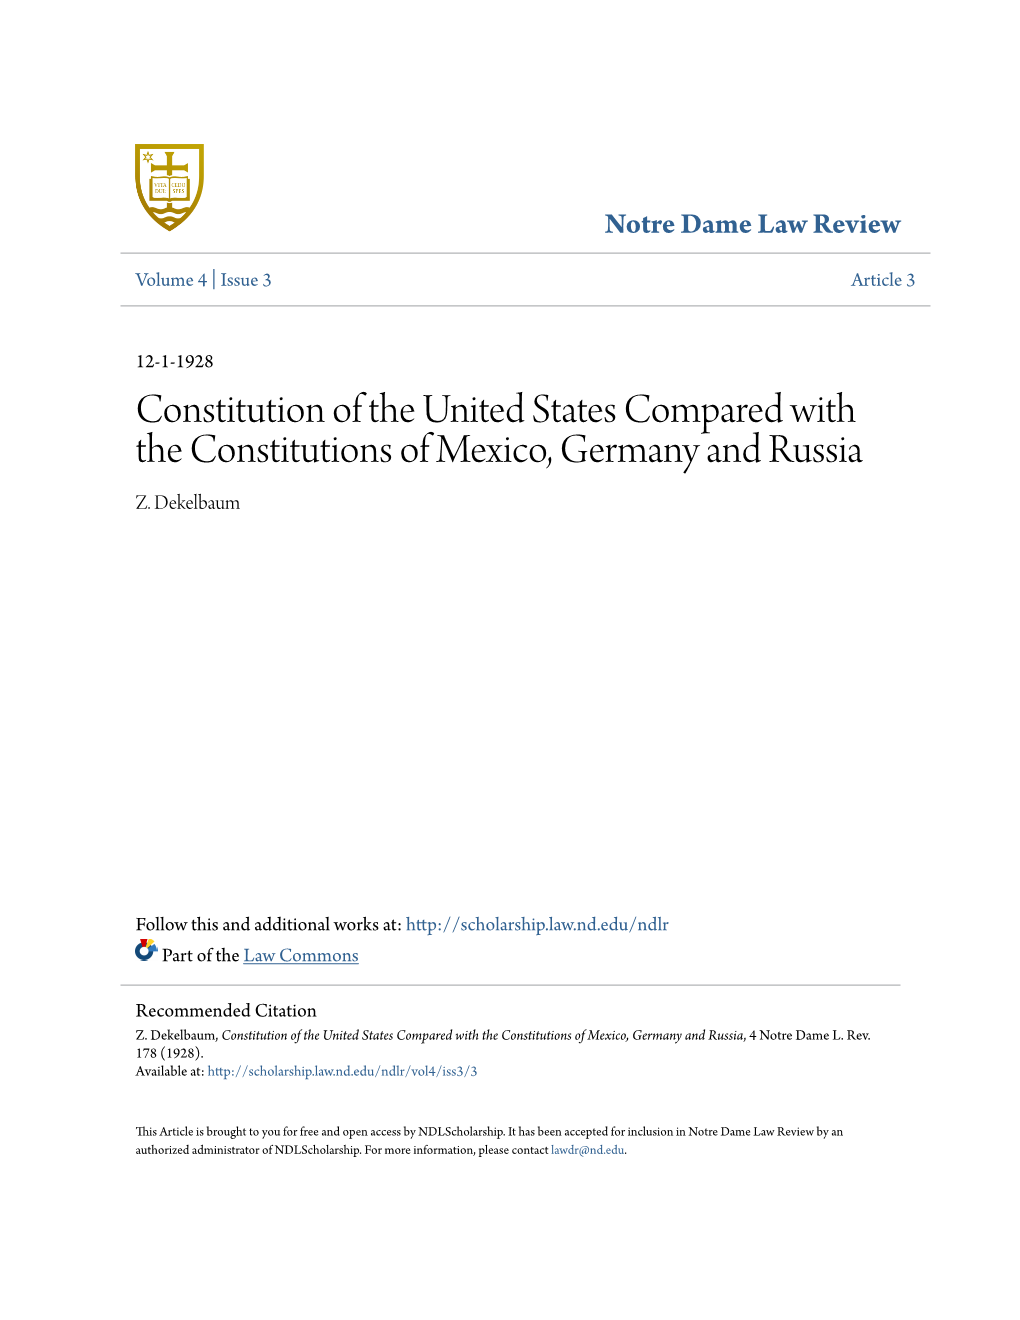 Constitution of the United States Compared with the Constitutions of Mexico, Germany and Russia Z